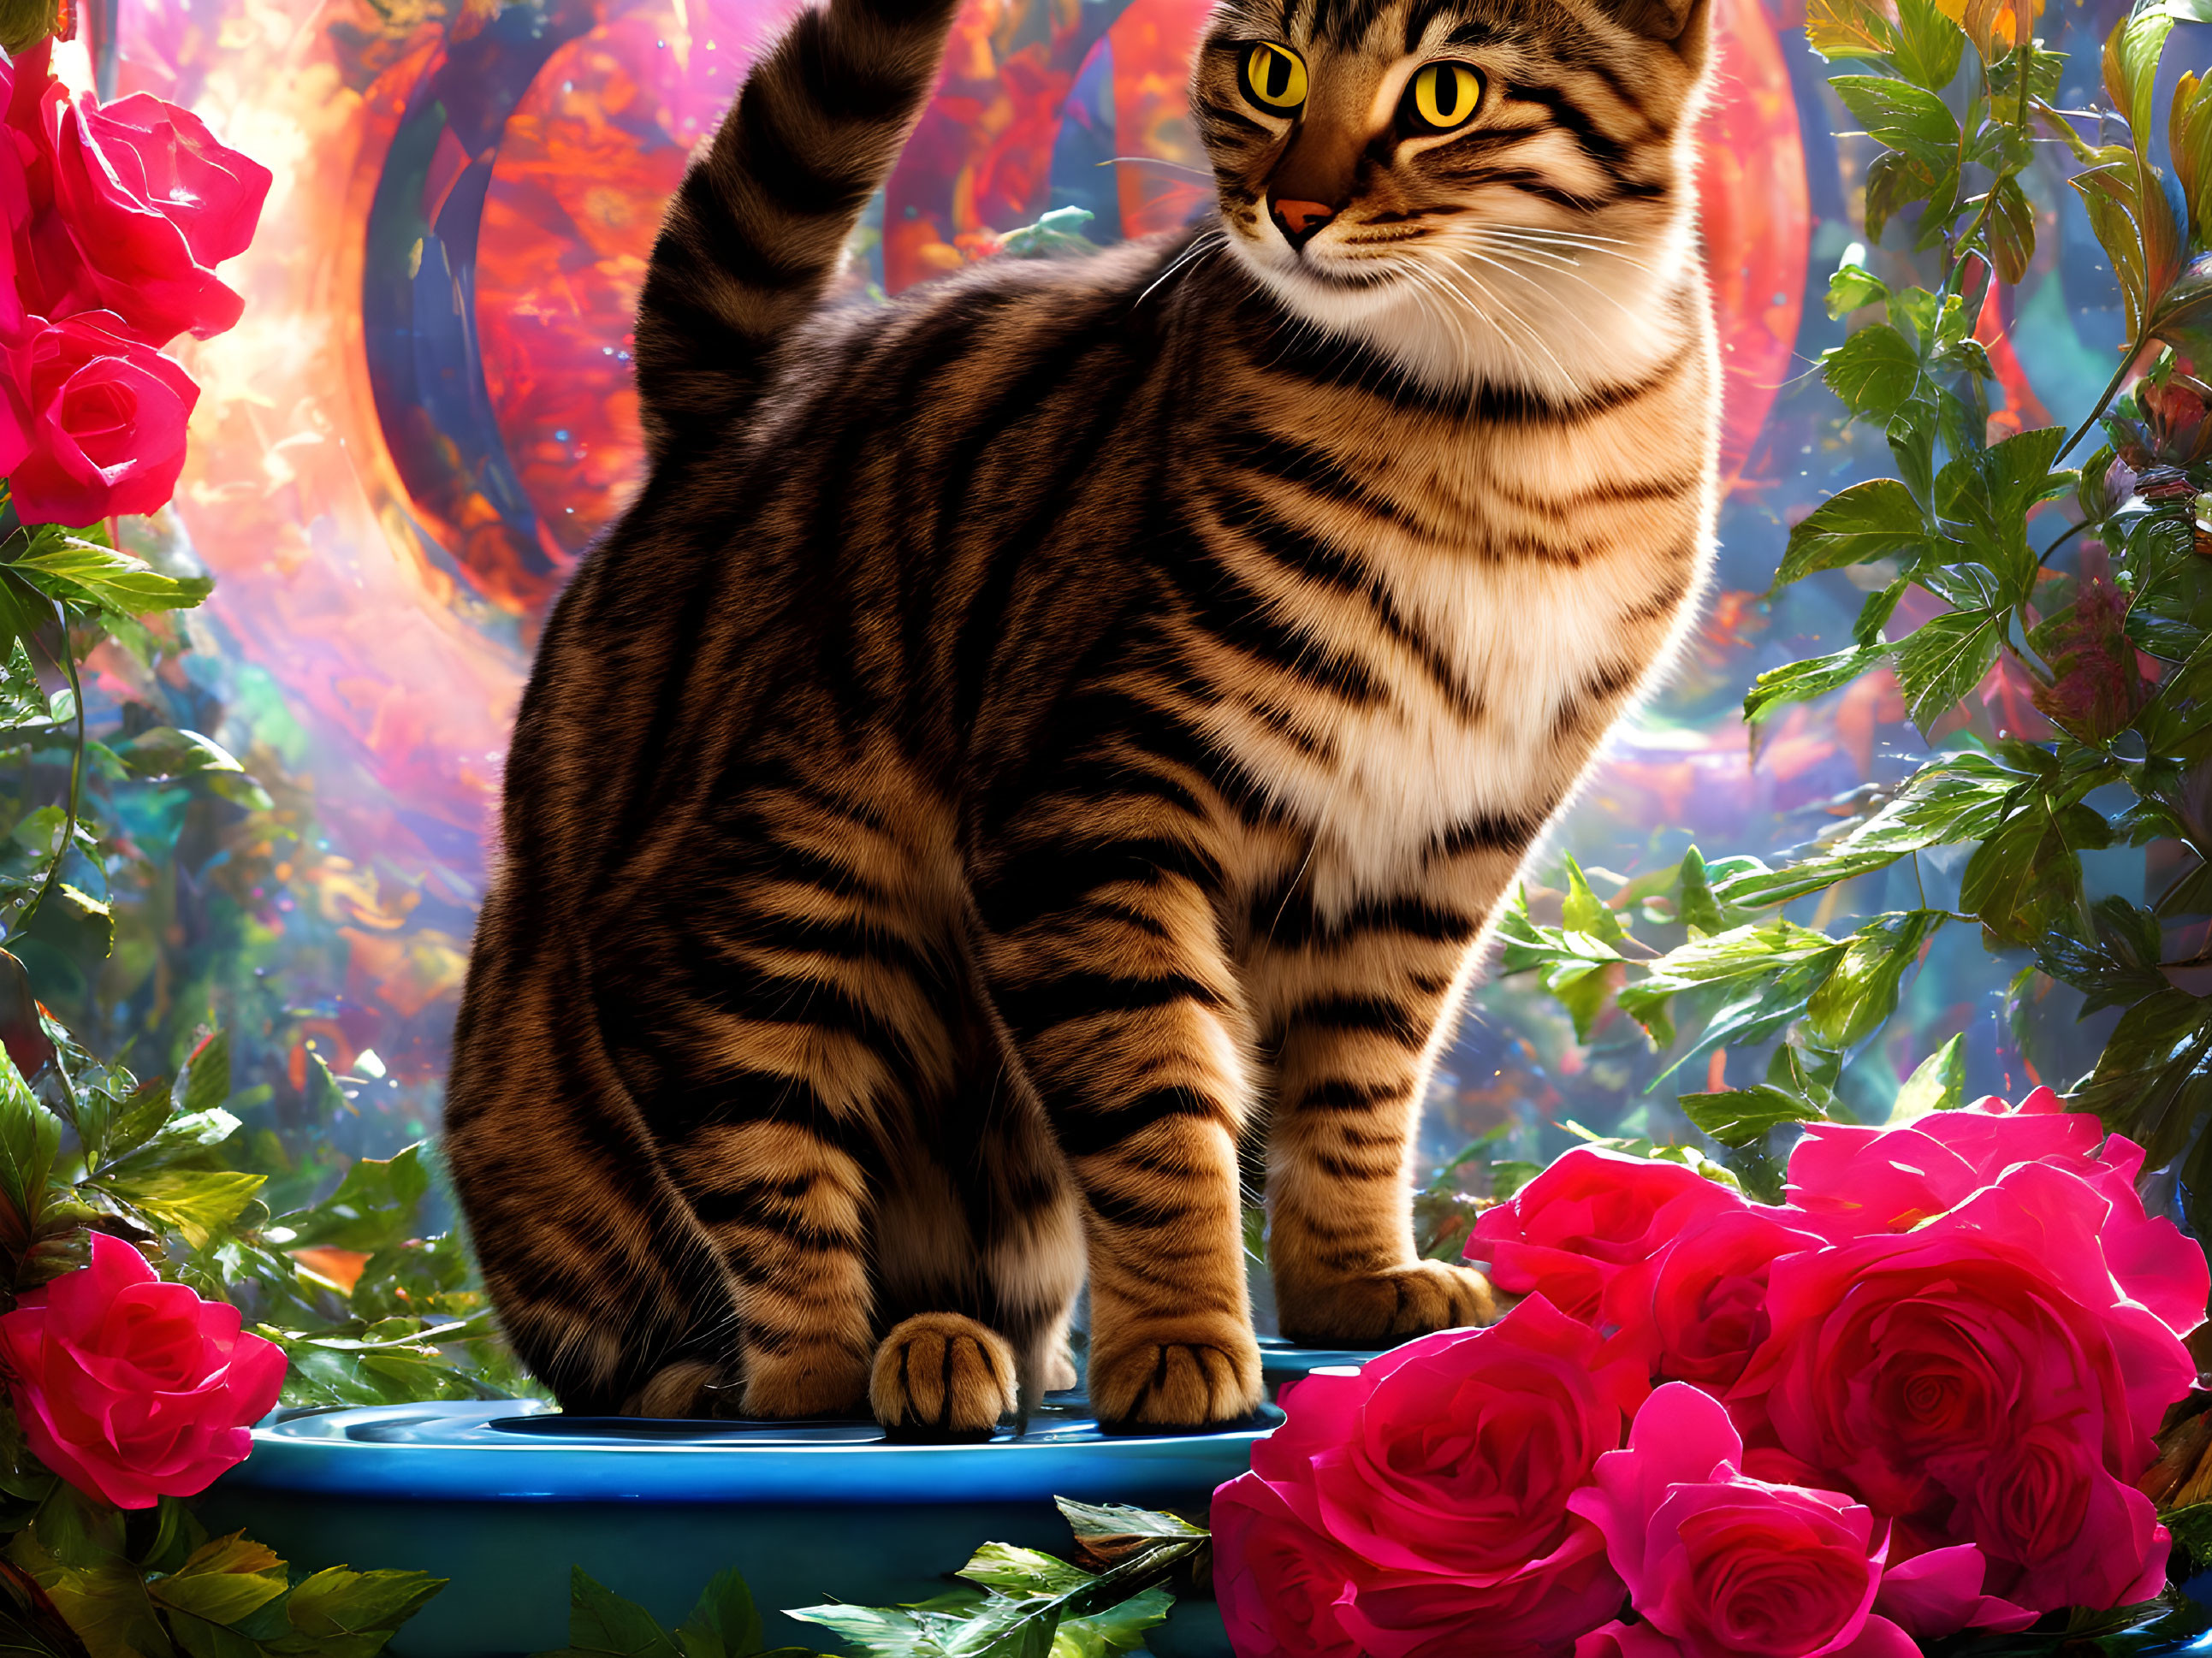 Tabby Cat Surrounded by Red Roses on Blue Surface